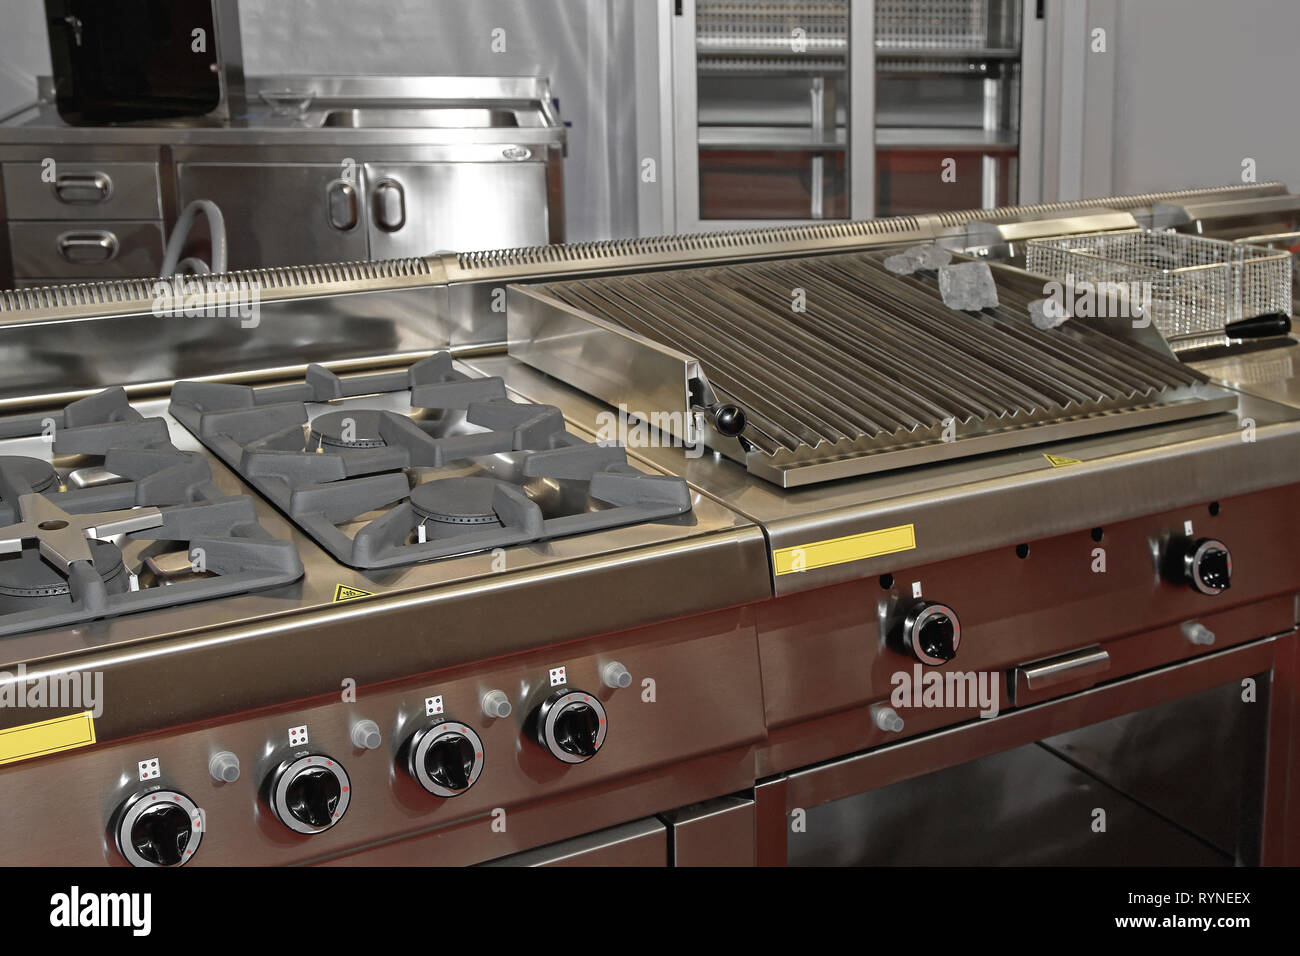 Gas Hob Stove and Grill in Professional Kitchen Restaurant Stock Photo